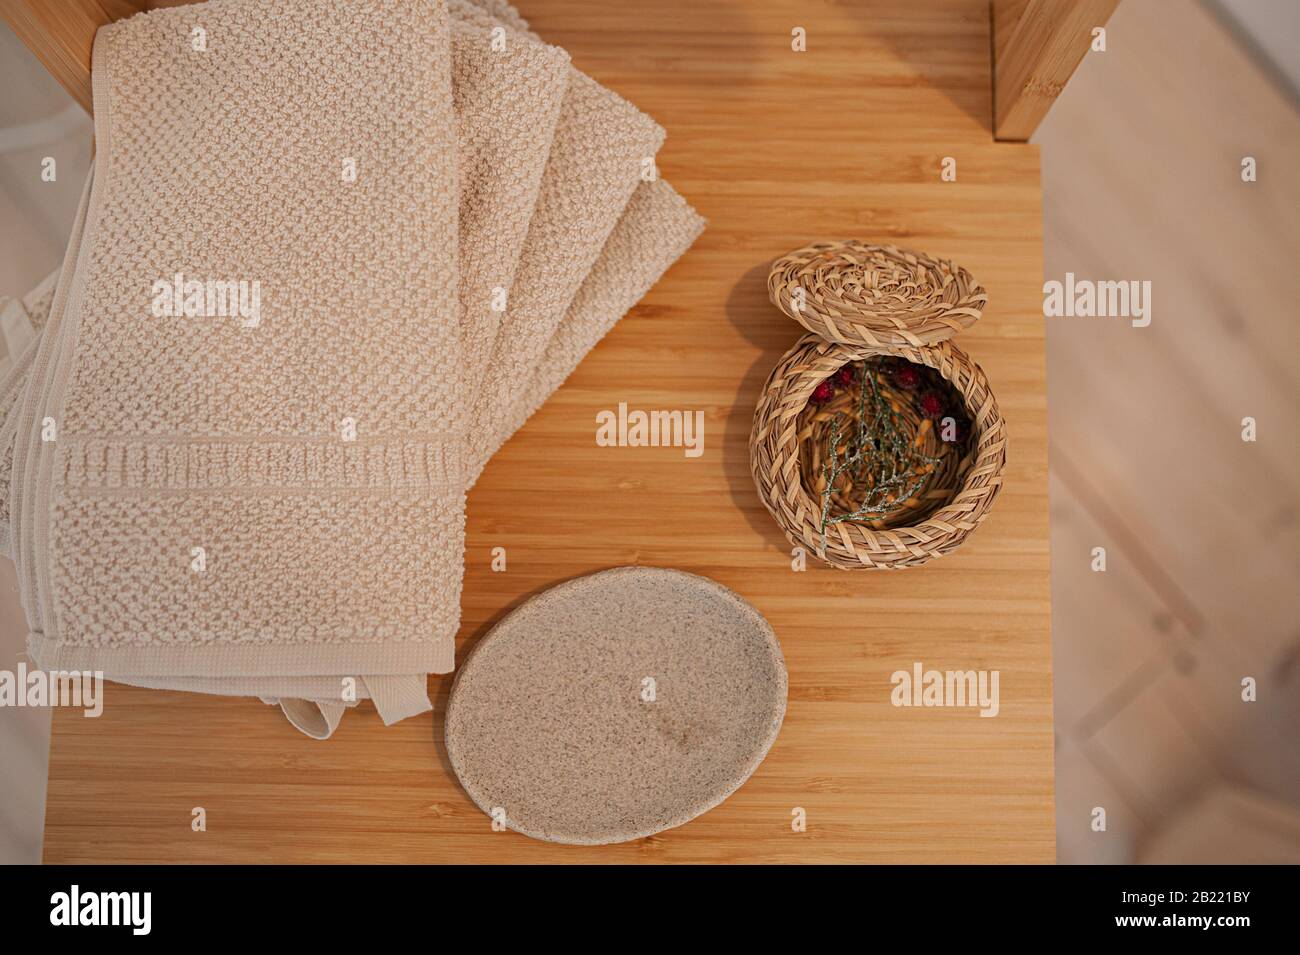 natural eco-friendly bath accessories, cotton towels, stone soap dish and wicker basket, on a wooden tabletop Stock Photo